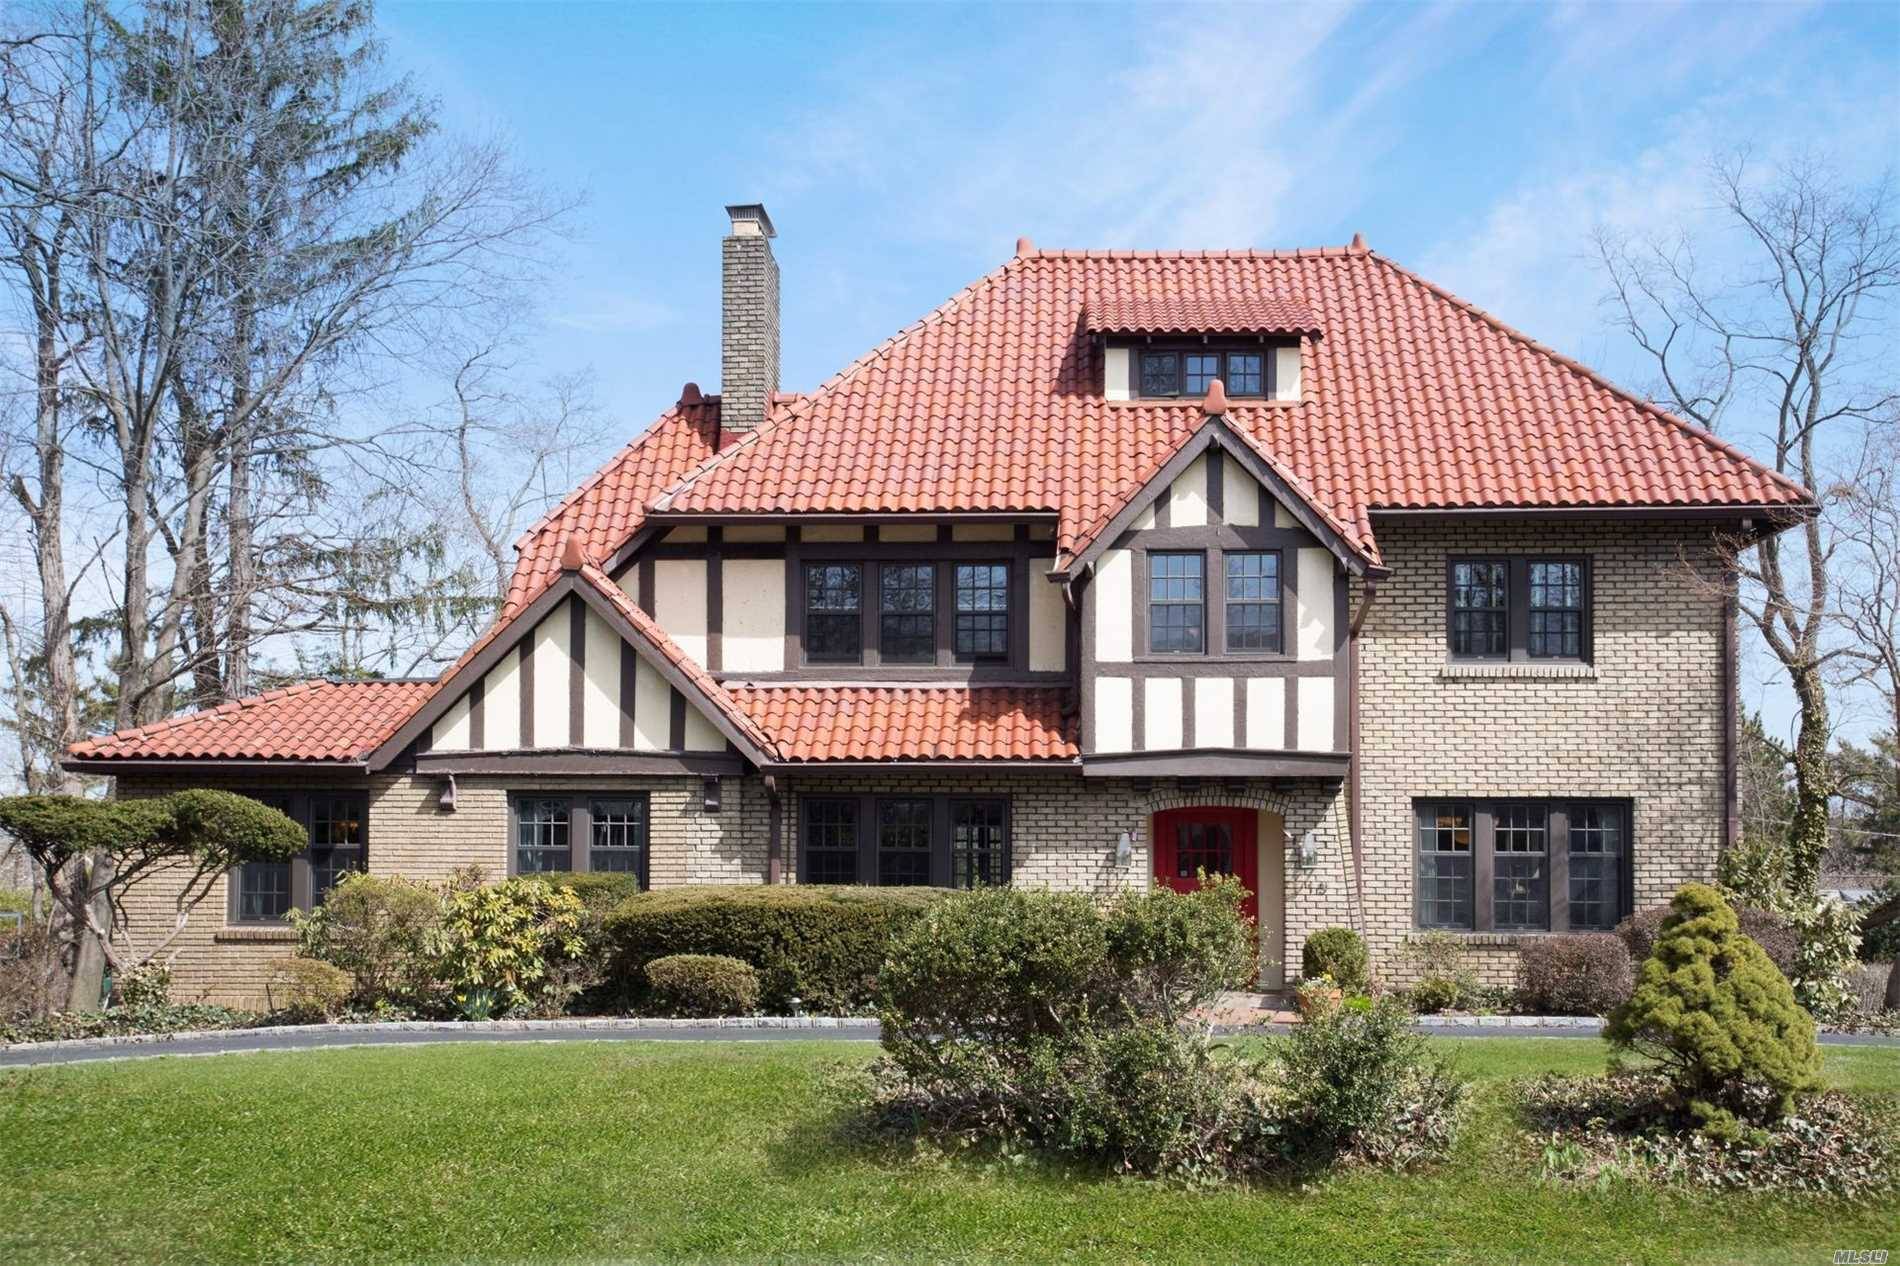 Restore And Make Your Own This Charming Spacious 6 Bedroom 3 Bath Brick Tudor In Great Neck Estate.